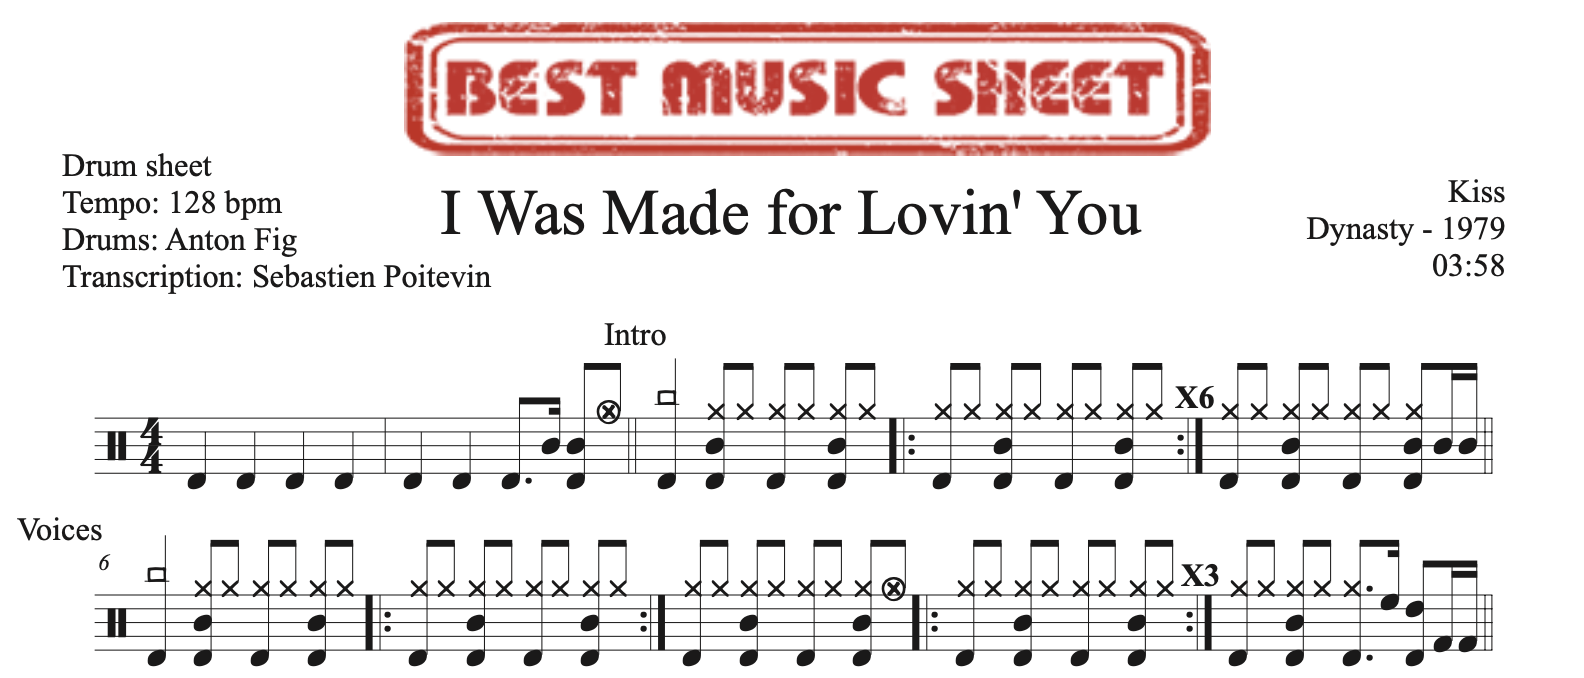 Sample drum sheet of I Was Made for Lovin You by Kiss single version